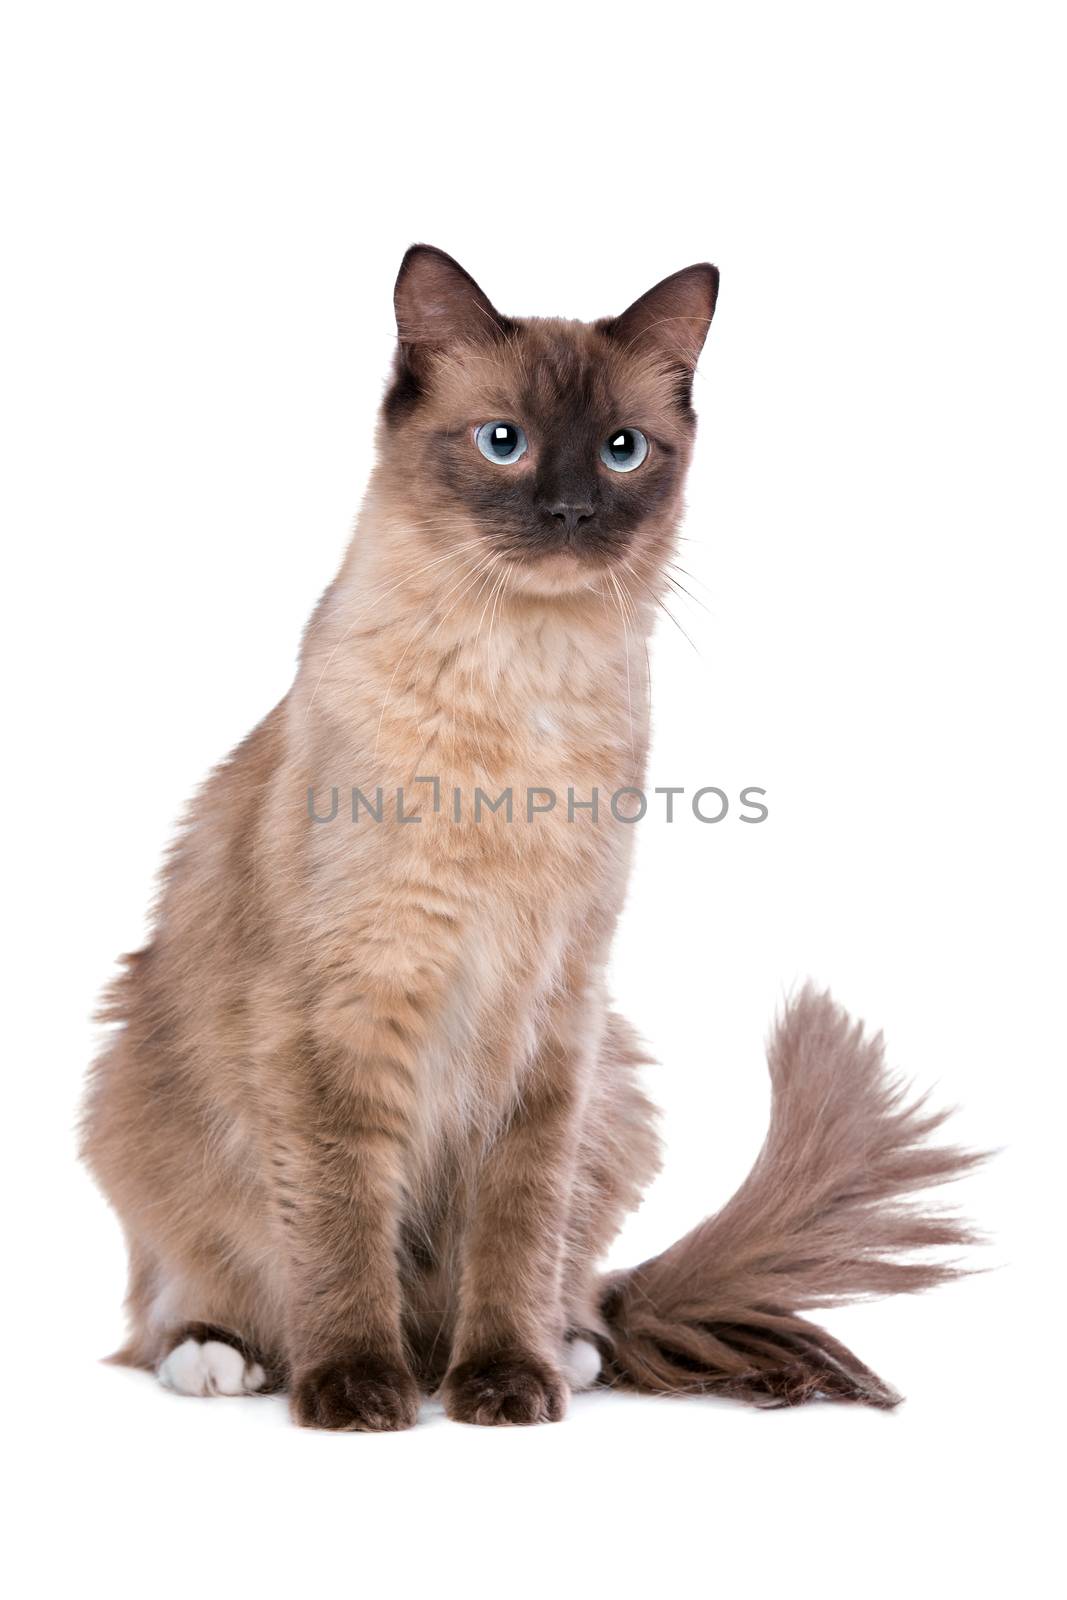 Ragdoll cat in front of a white background